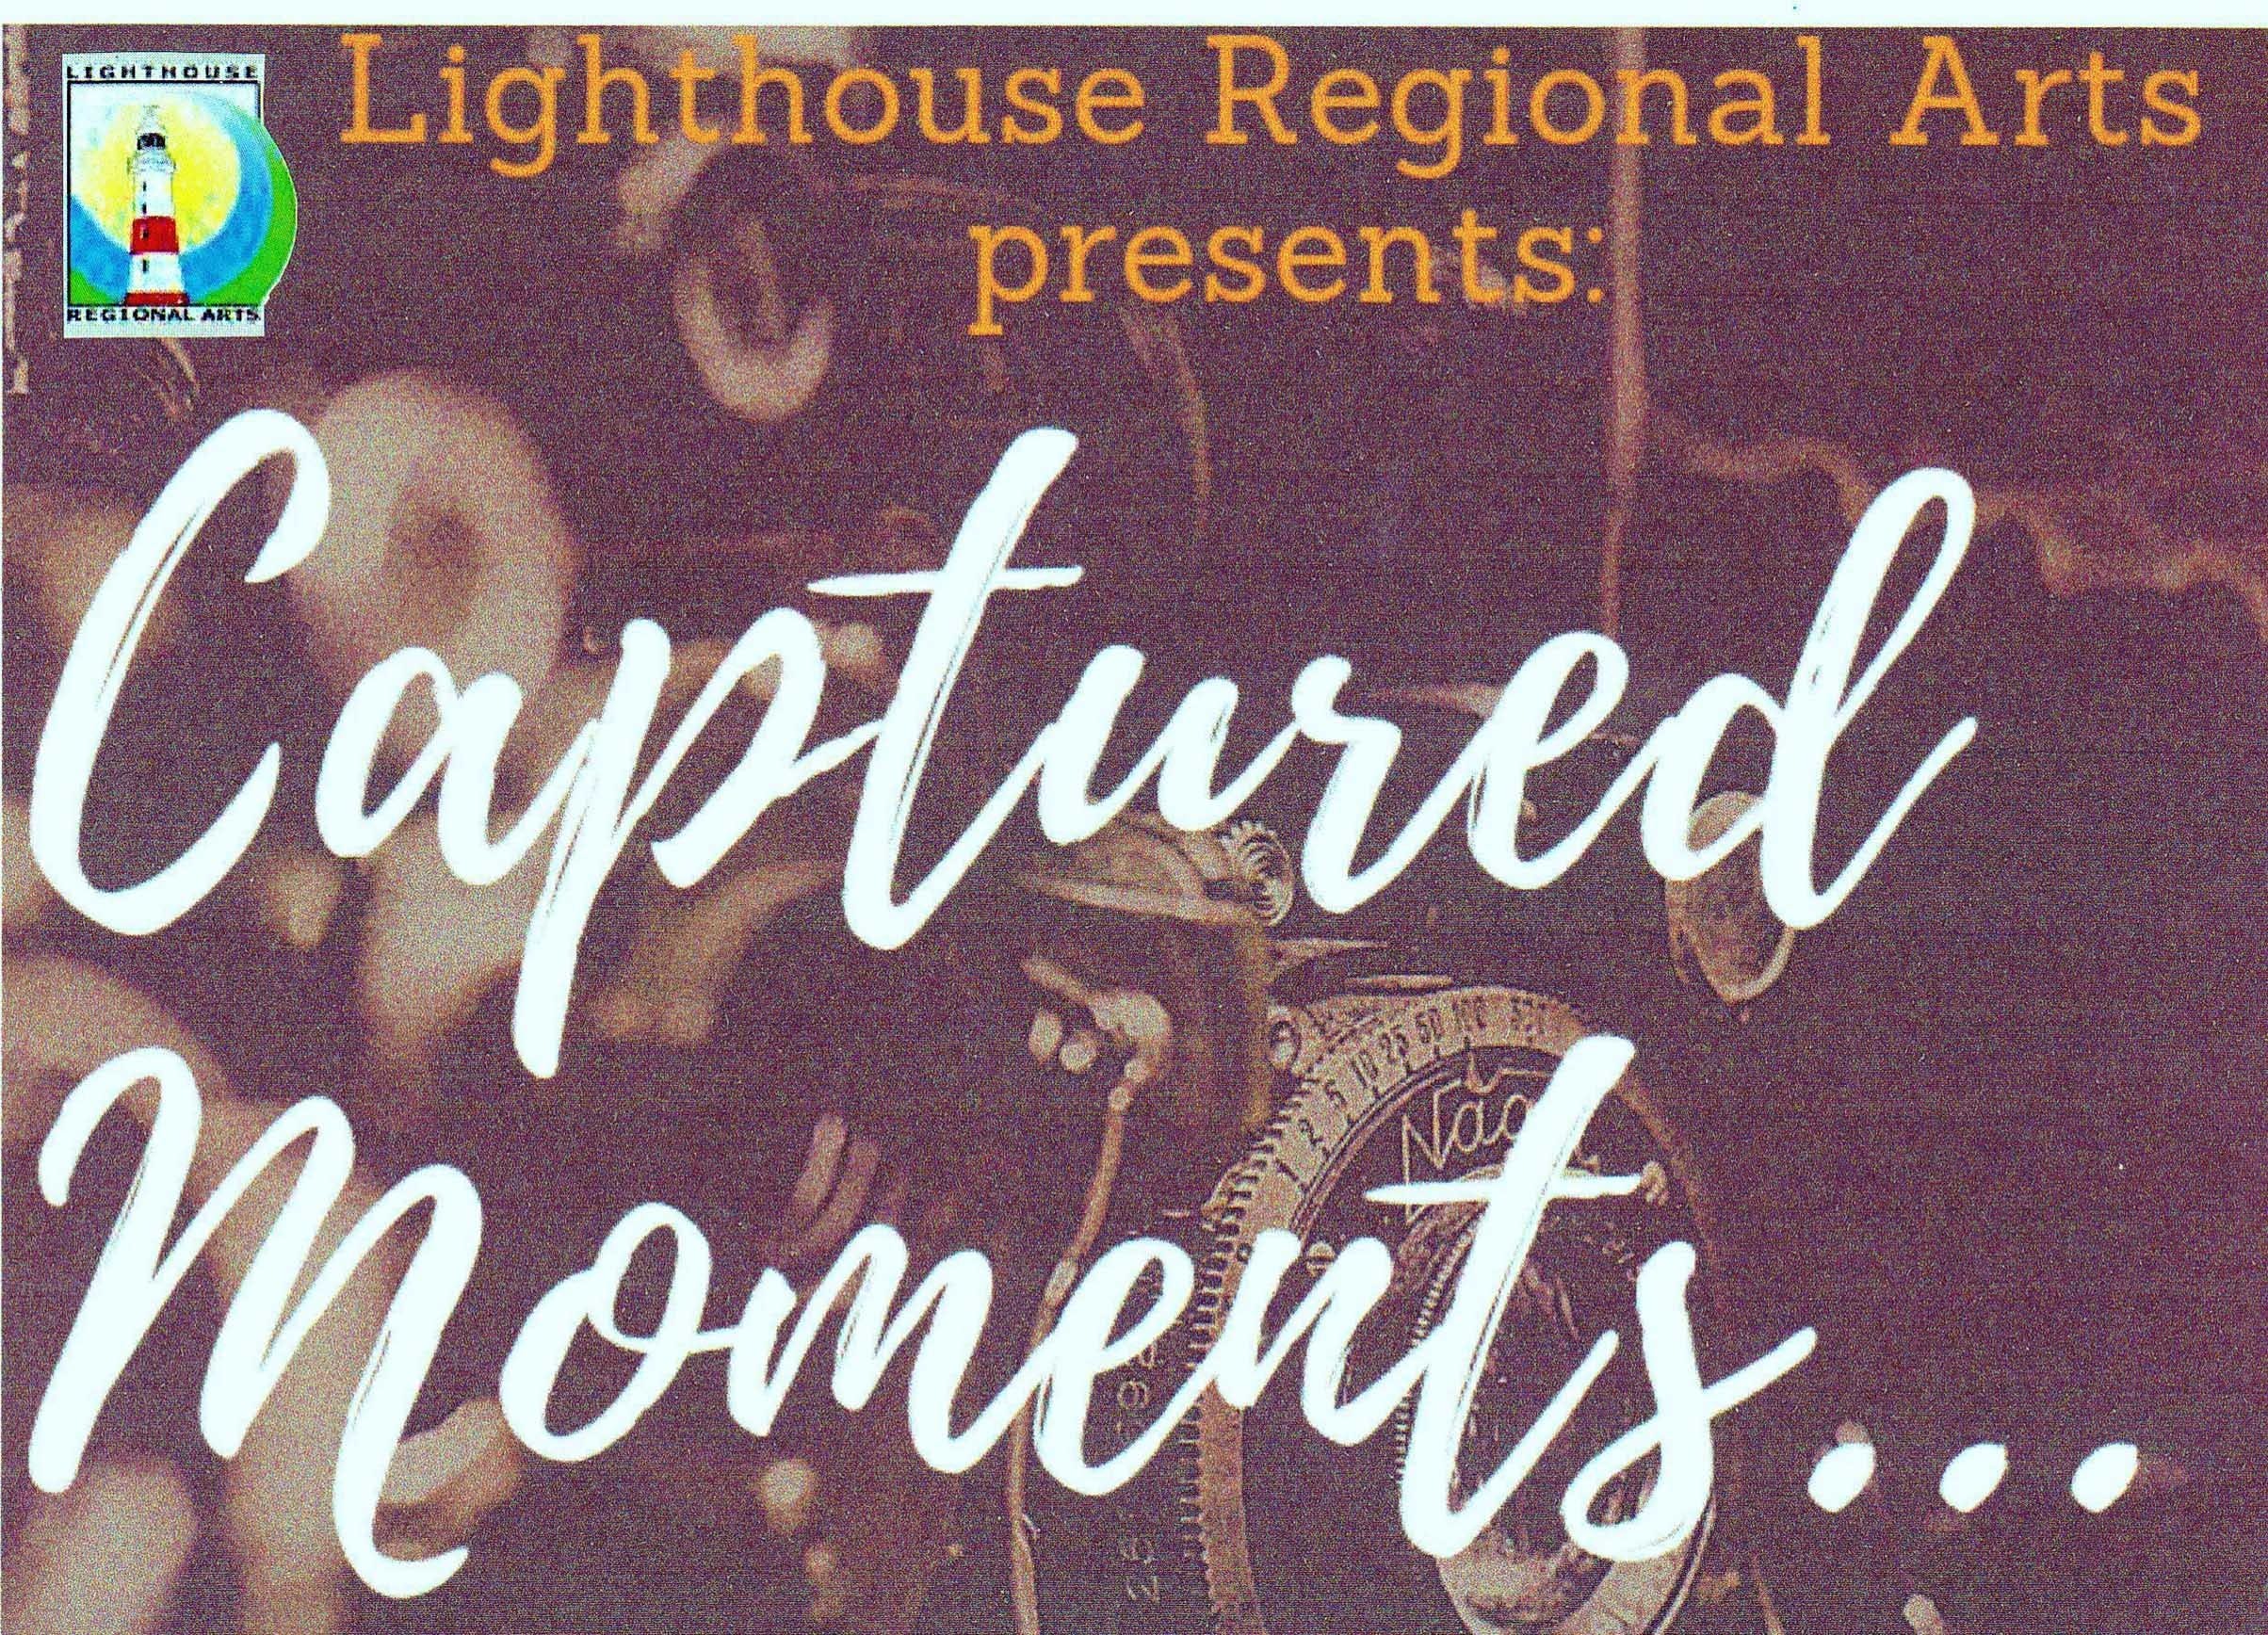 Watch House Exhibition  Captured Moments - Attractions Melbourne